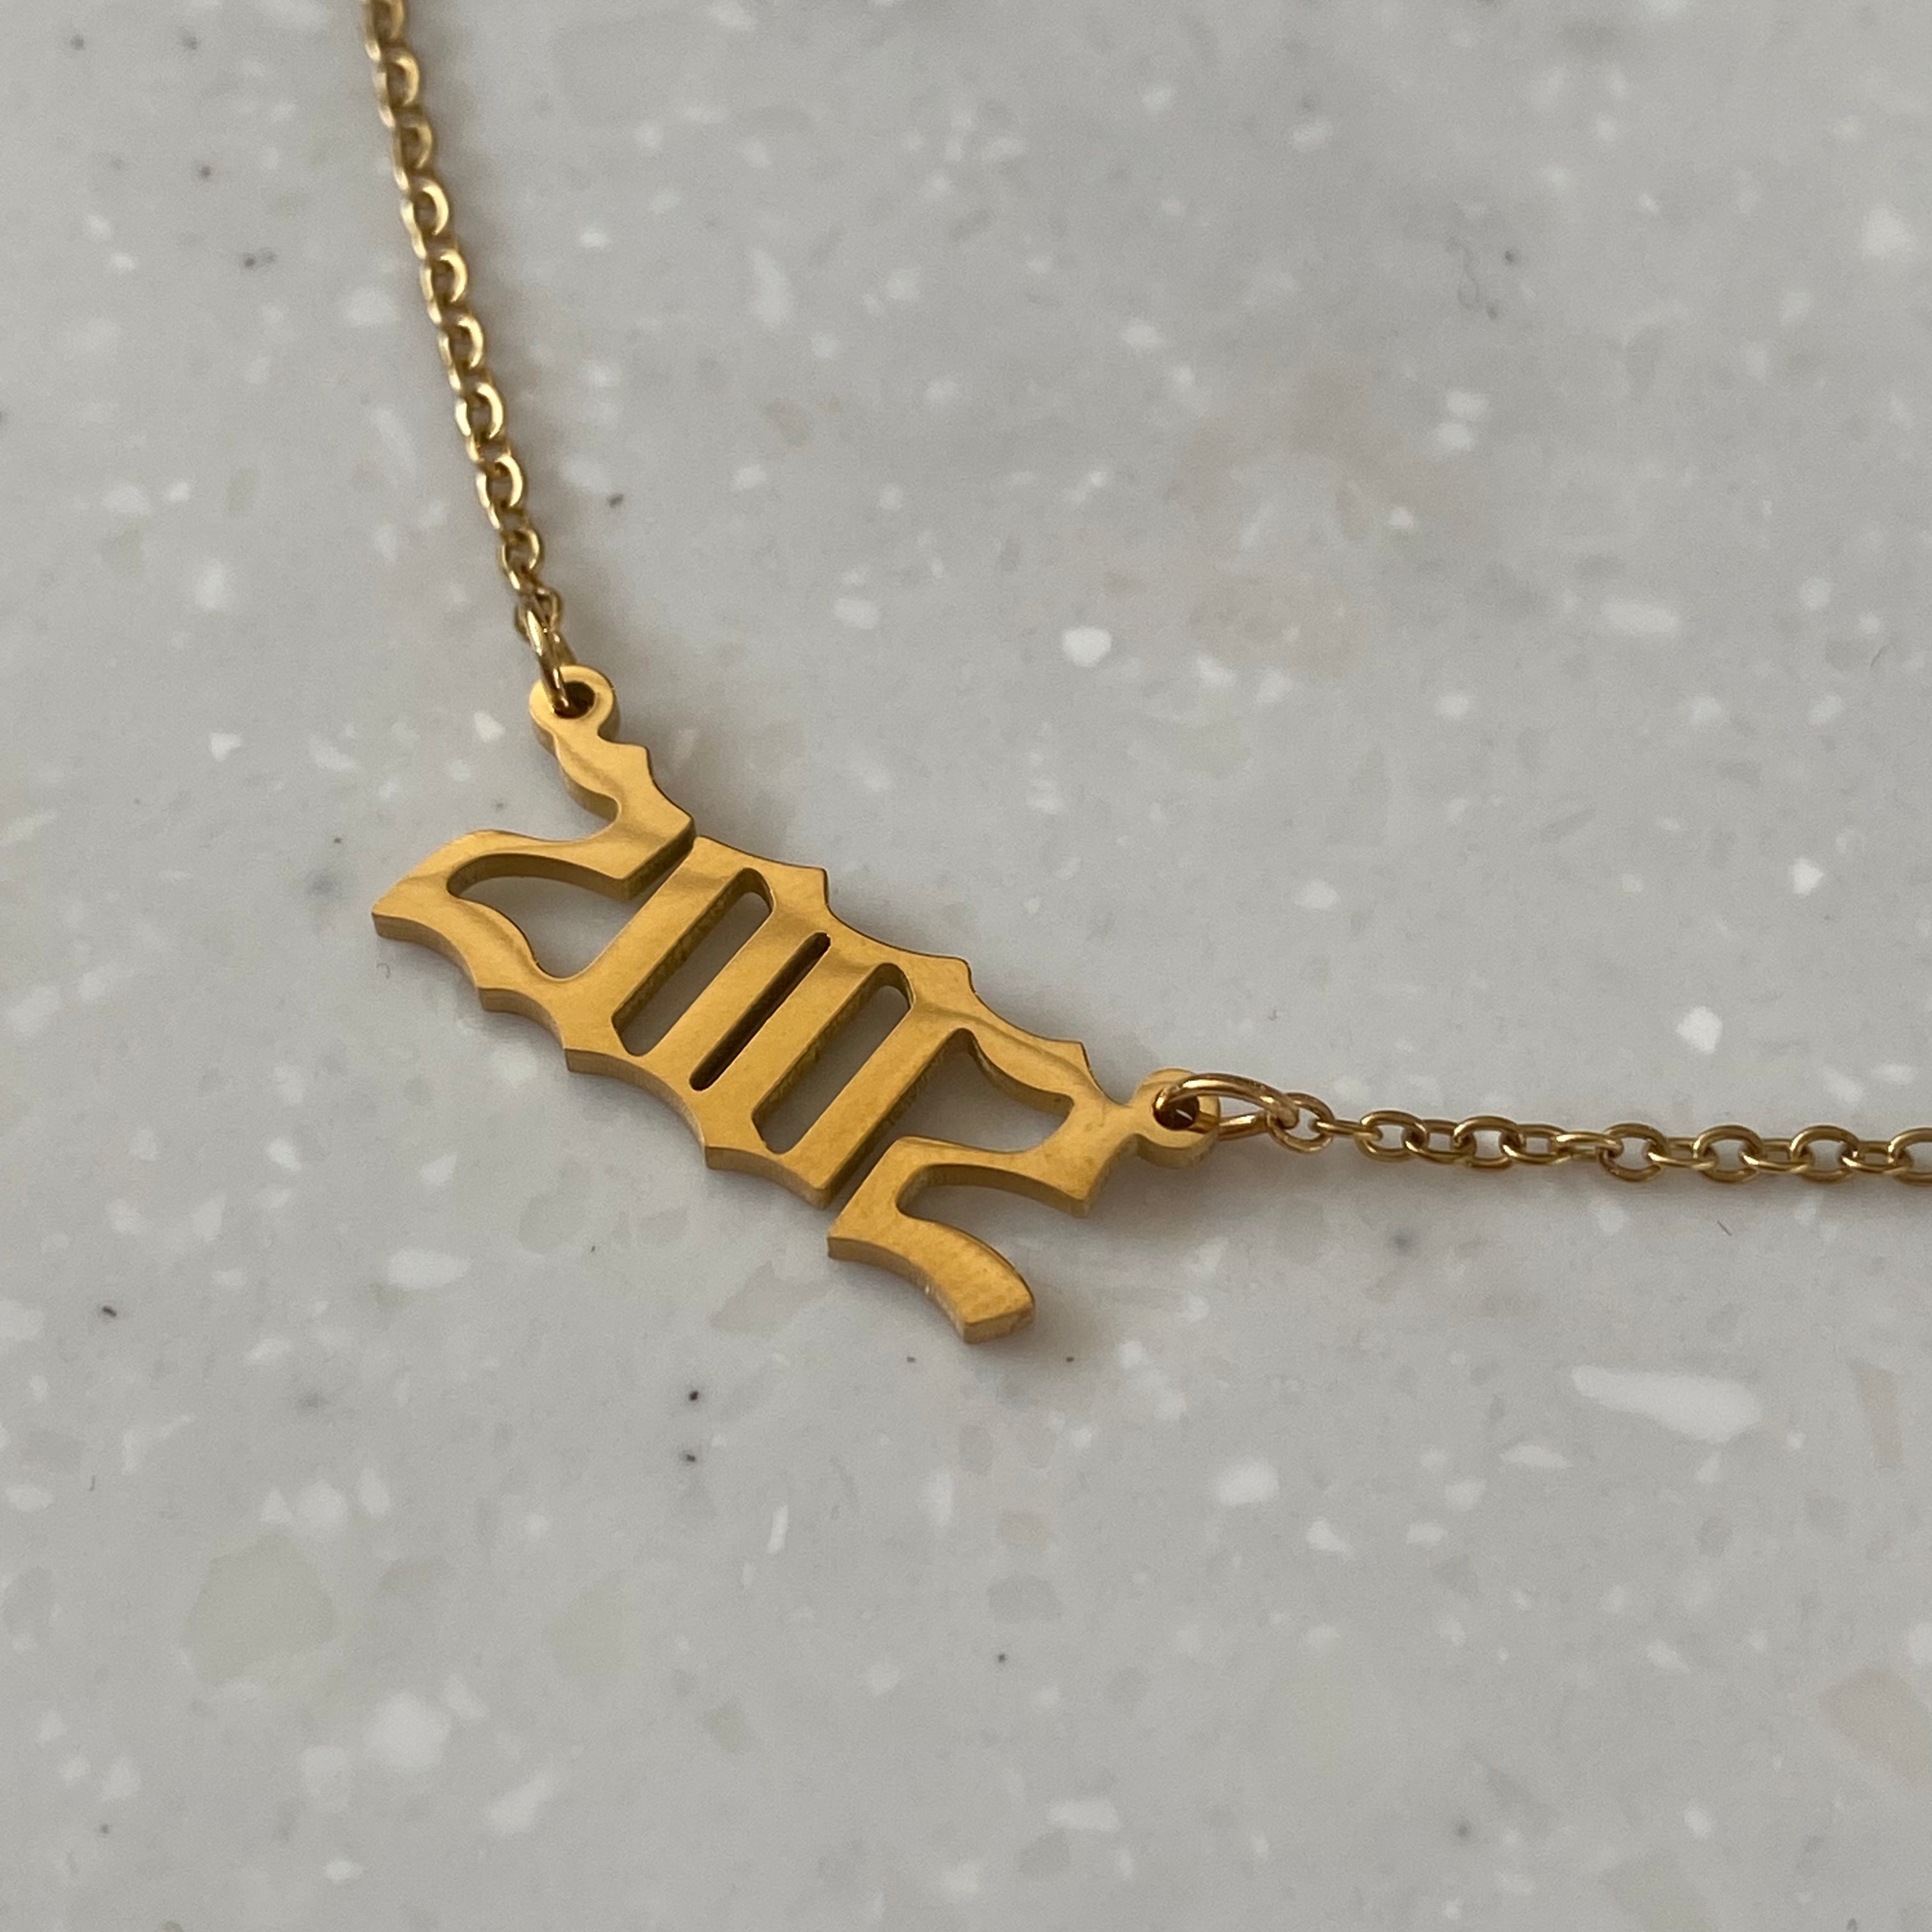 year necklace